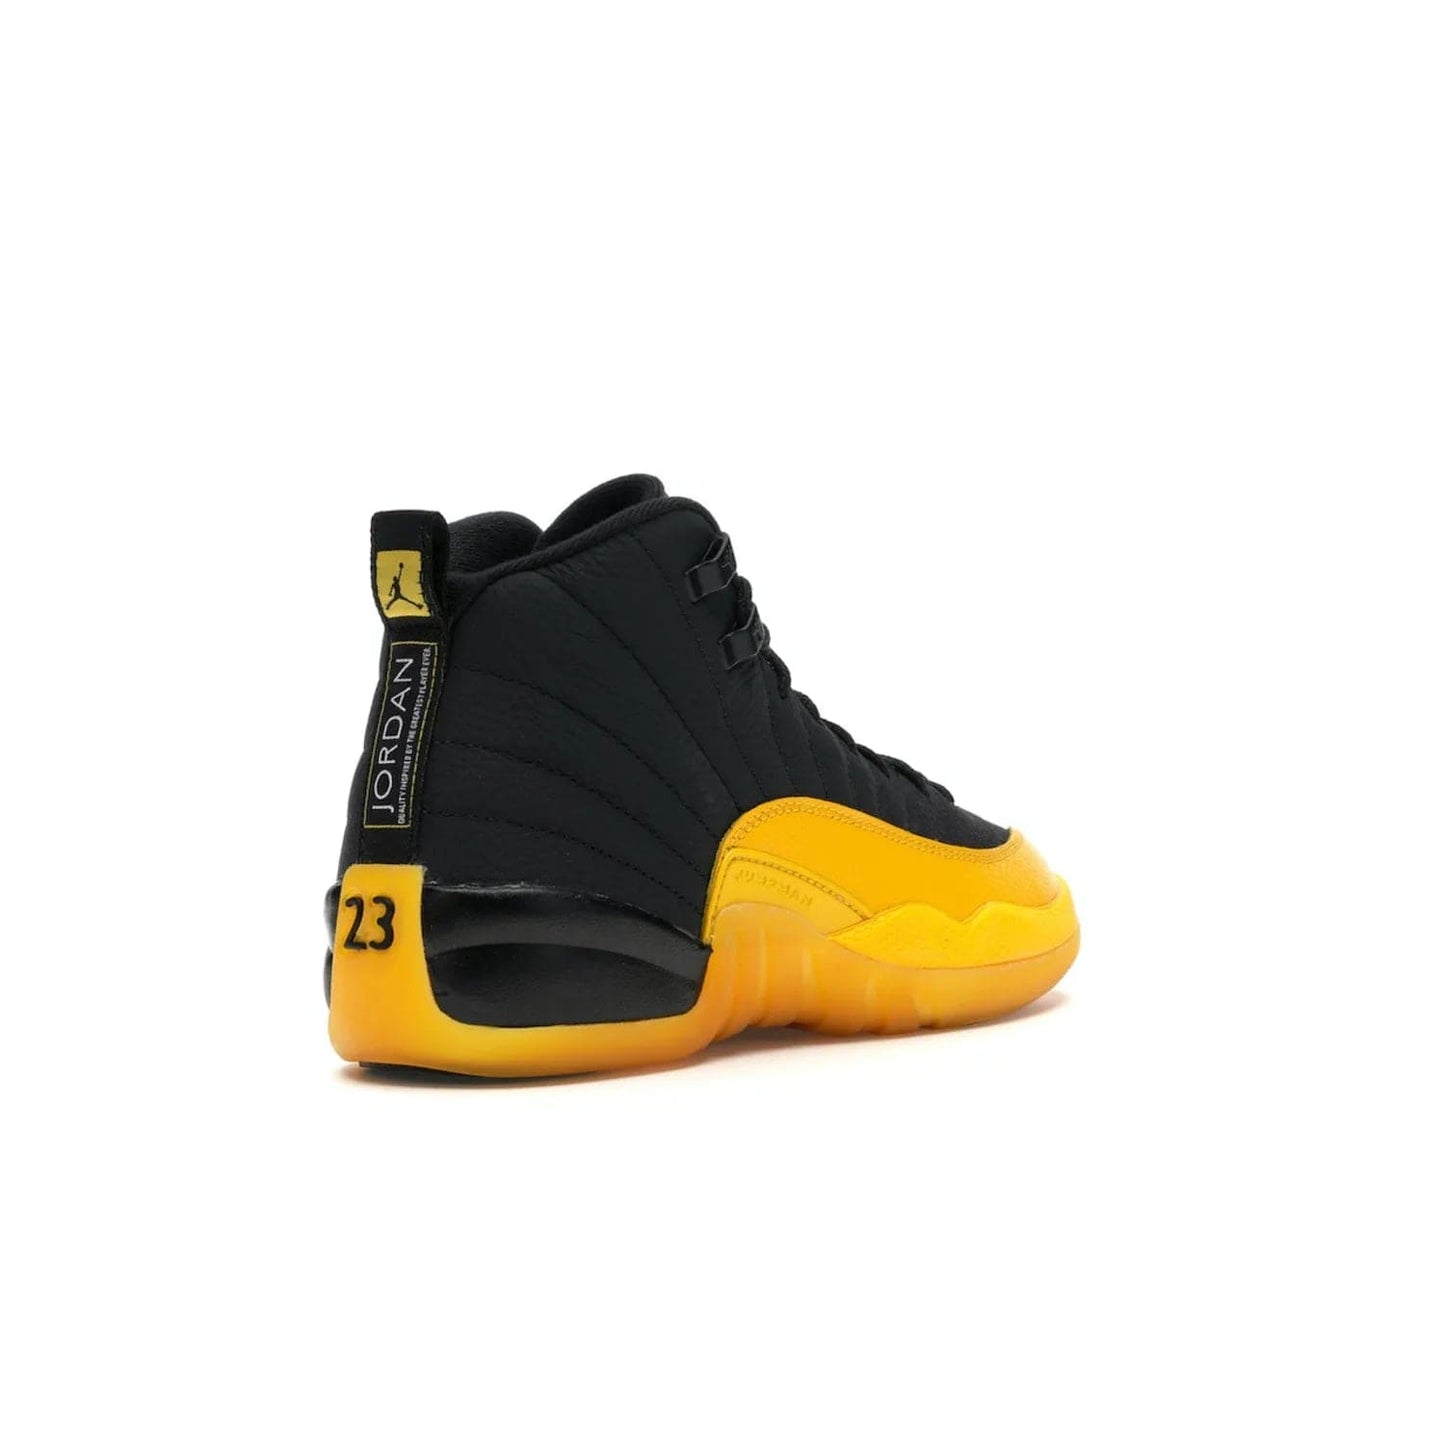 Jordan 12 Retro Black University Gold (GS) - Image 32 - Only at www.BallersClubKickz.com - Upgrade your kid's shoe collection with the Jordan 12 Retro Black University Gold. With classic style, black tumbled leather upper, and University Gold accents, it's a great summer look. Out July 2020.